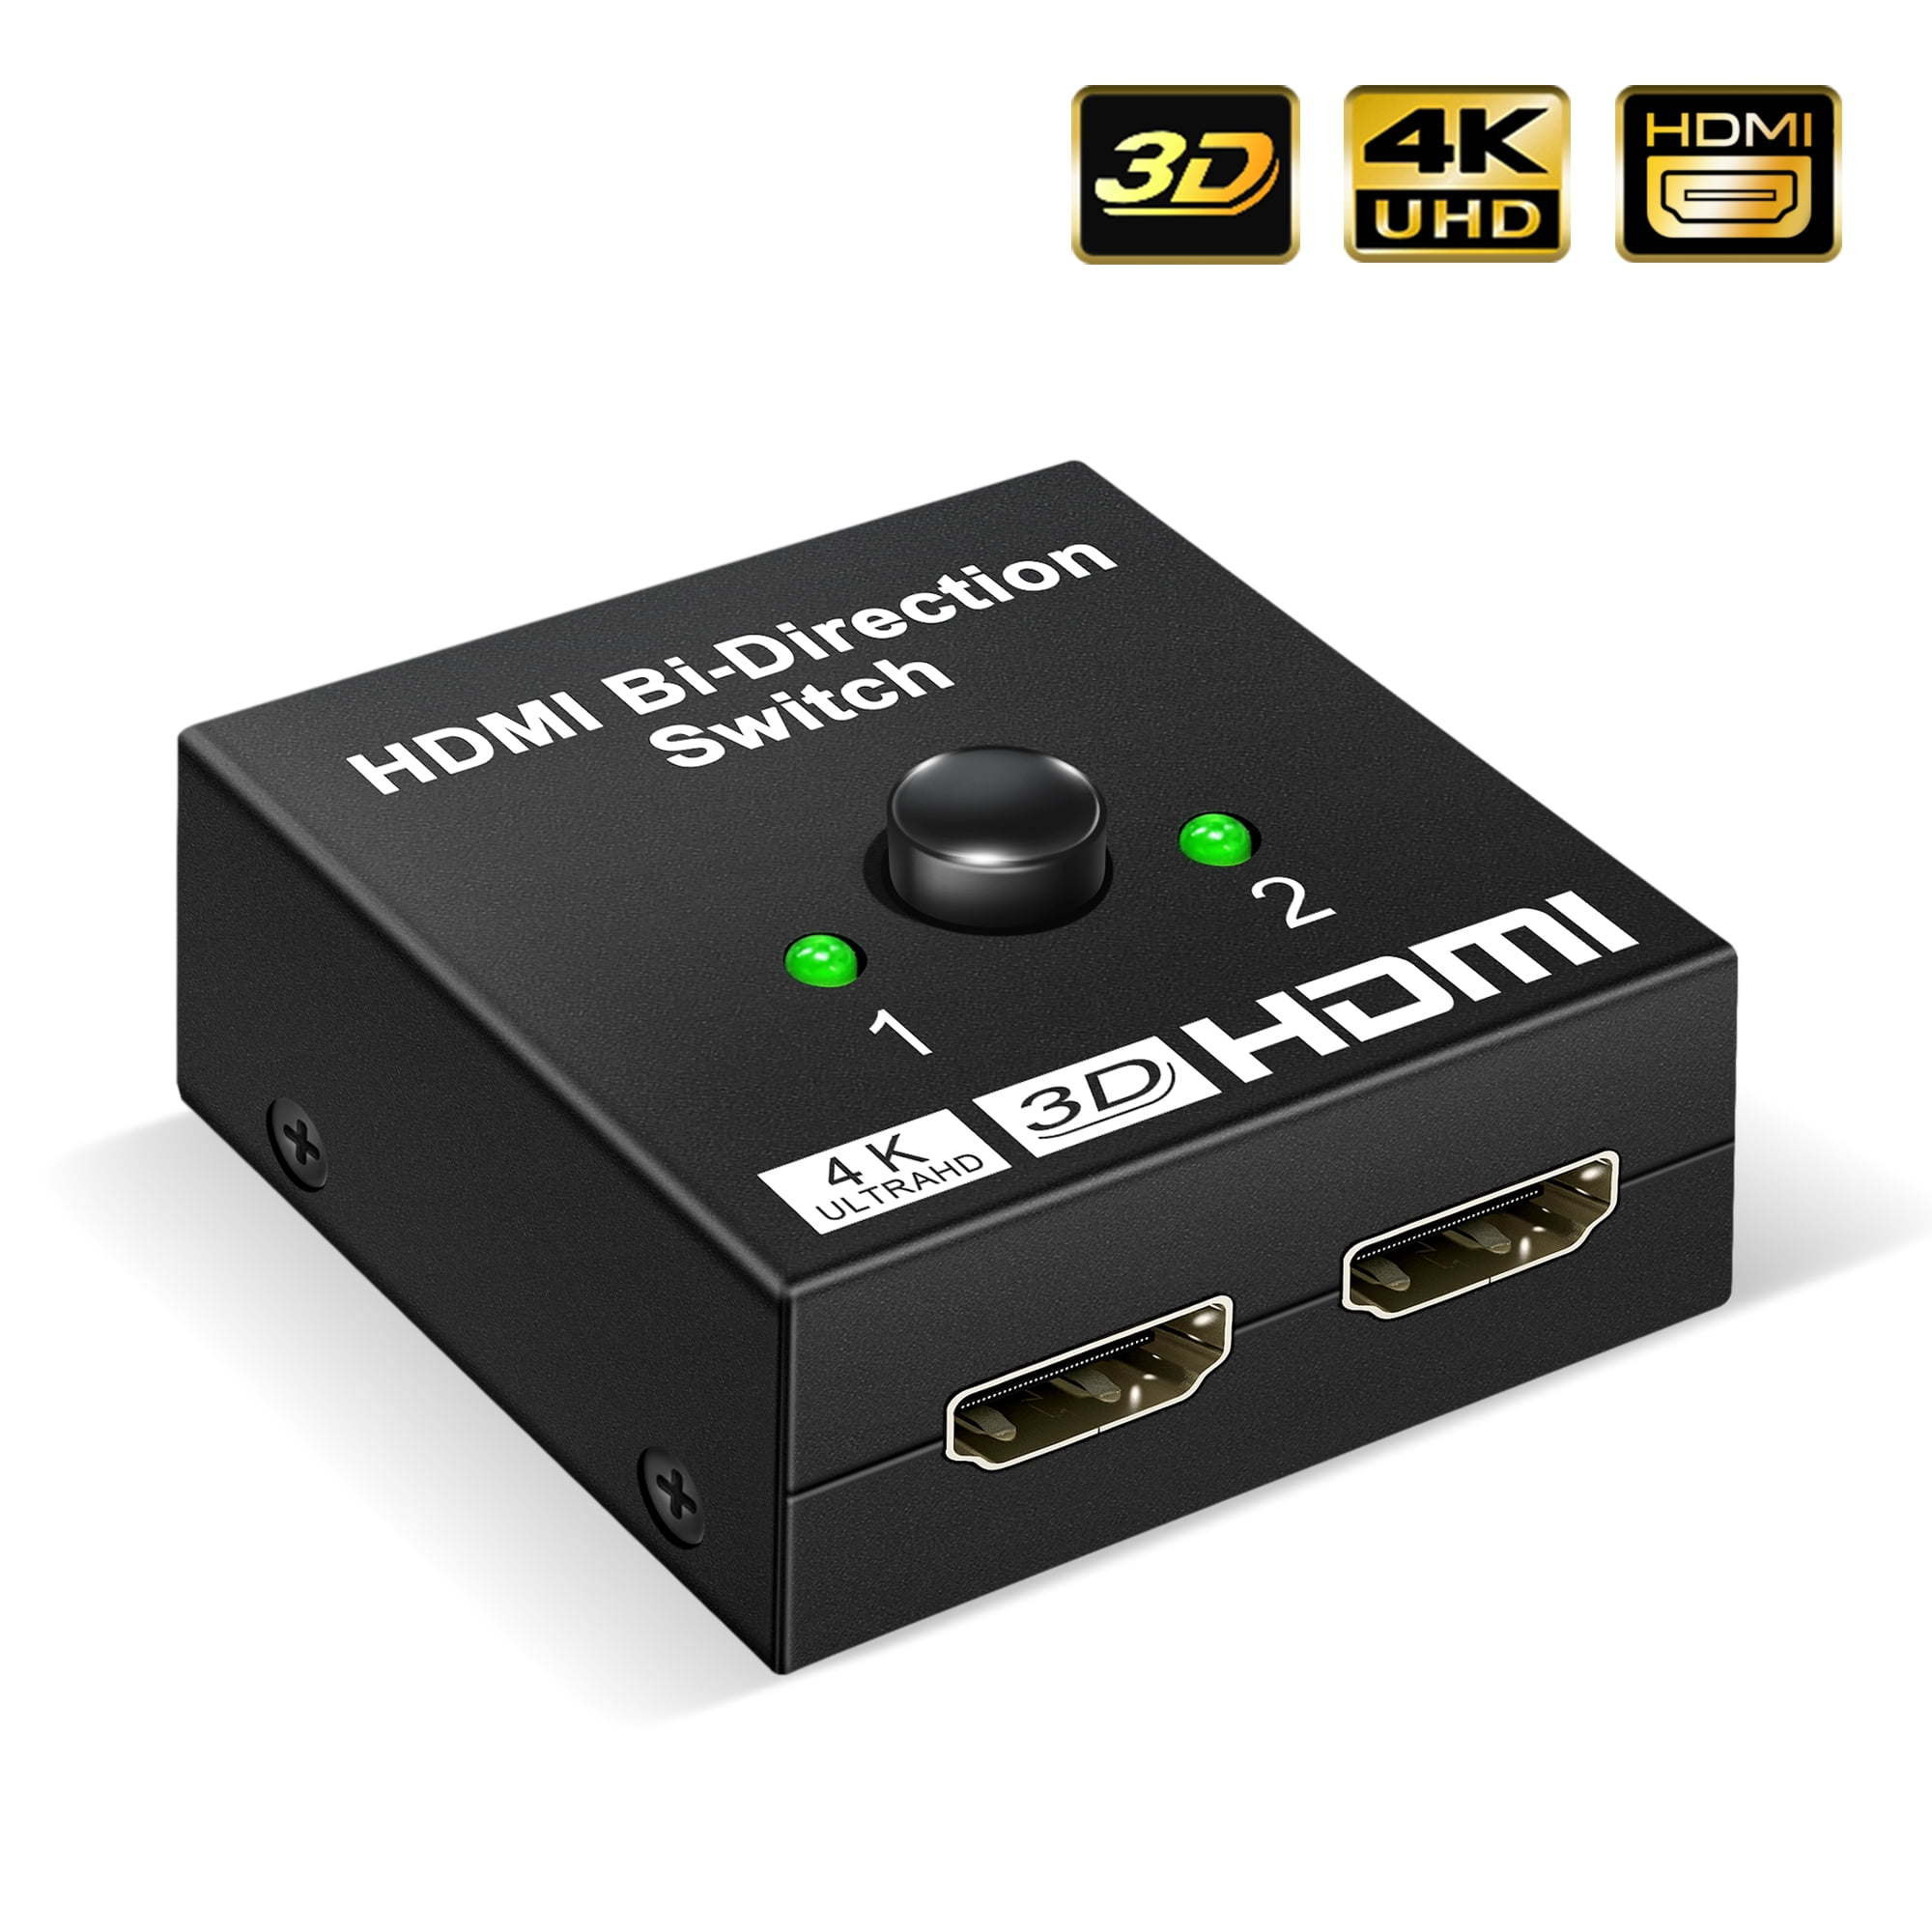 4K HDMI Splitter for Dual Monitors Extend, HDMI Switch Splitter1 in 2 out - Walmart.com